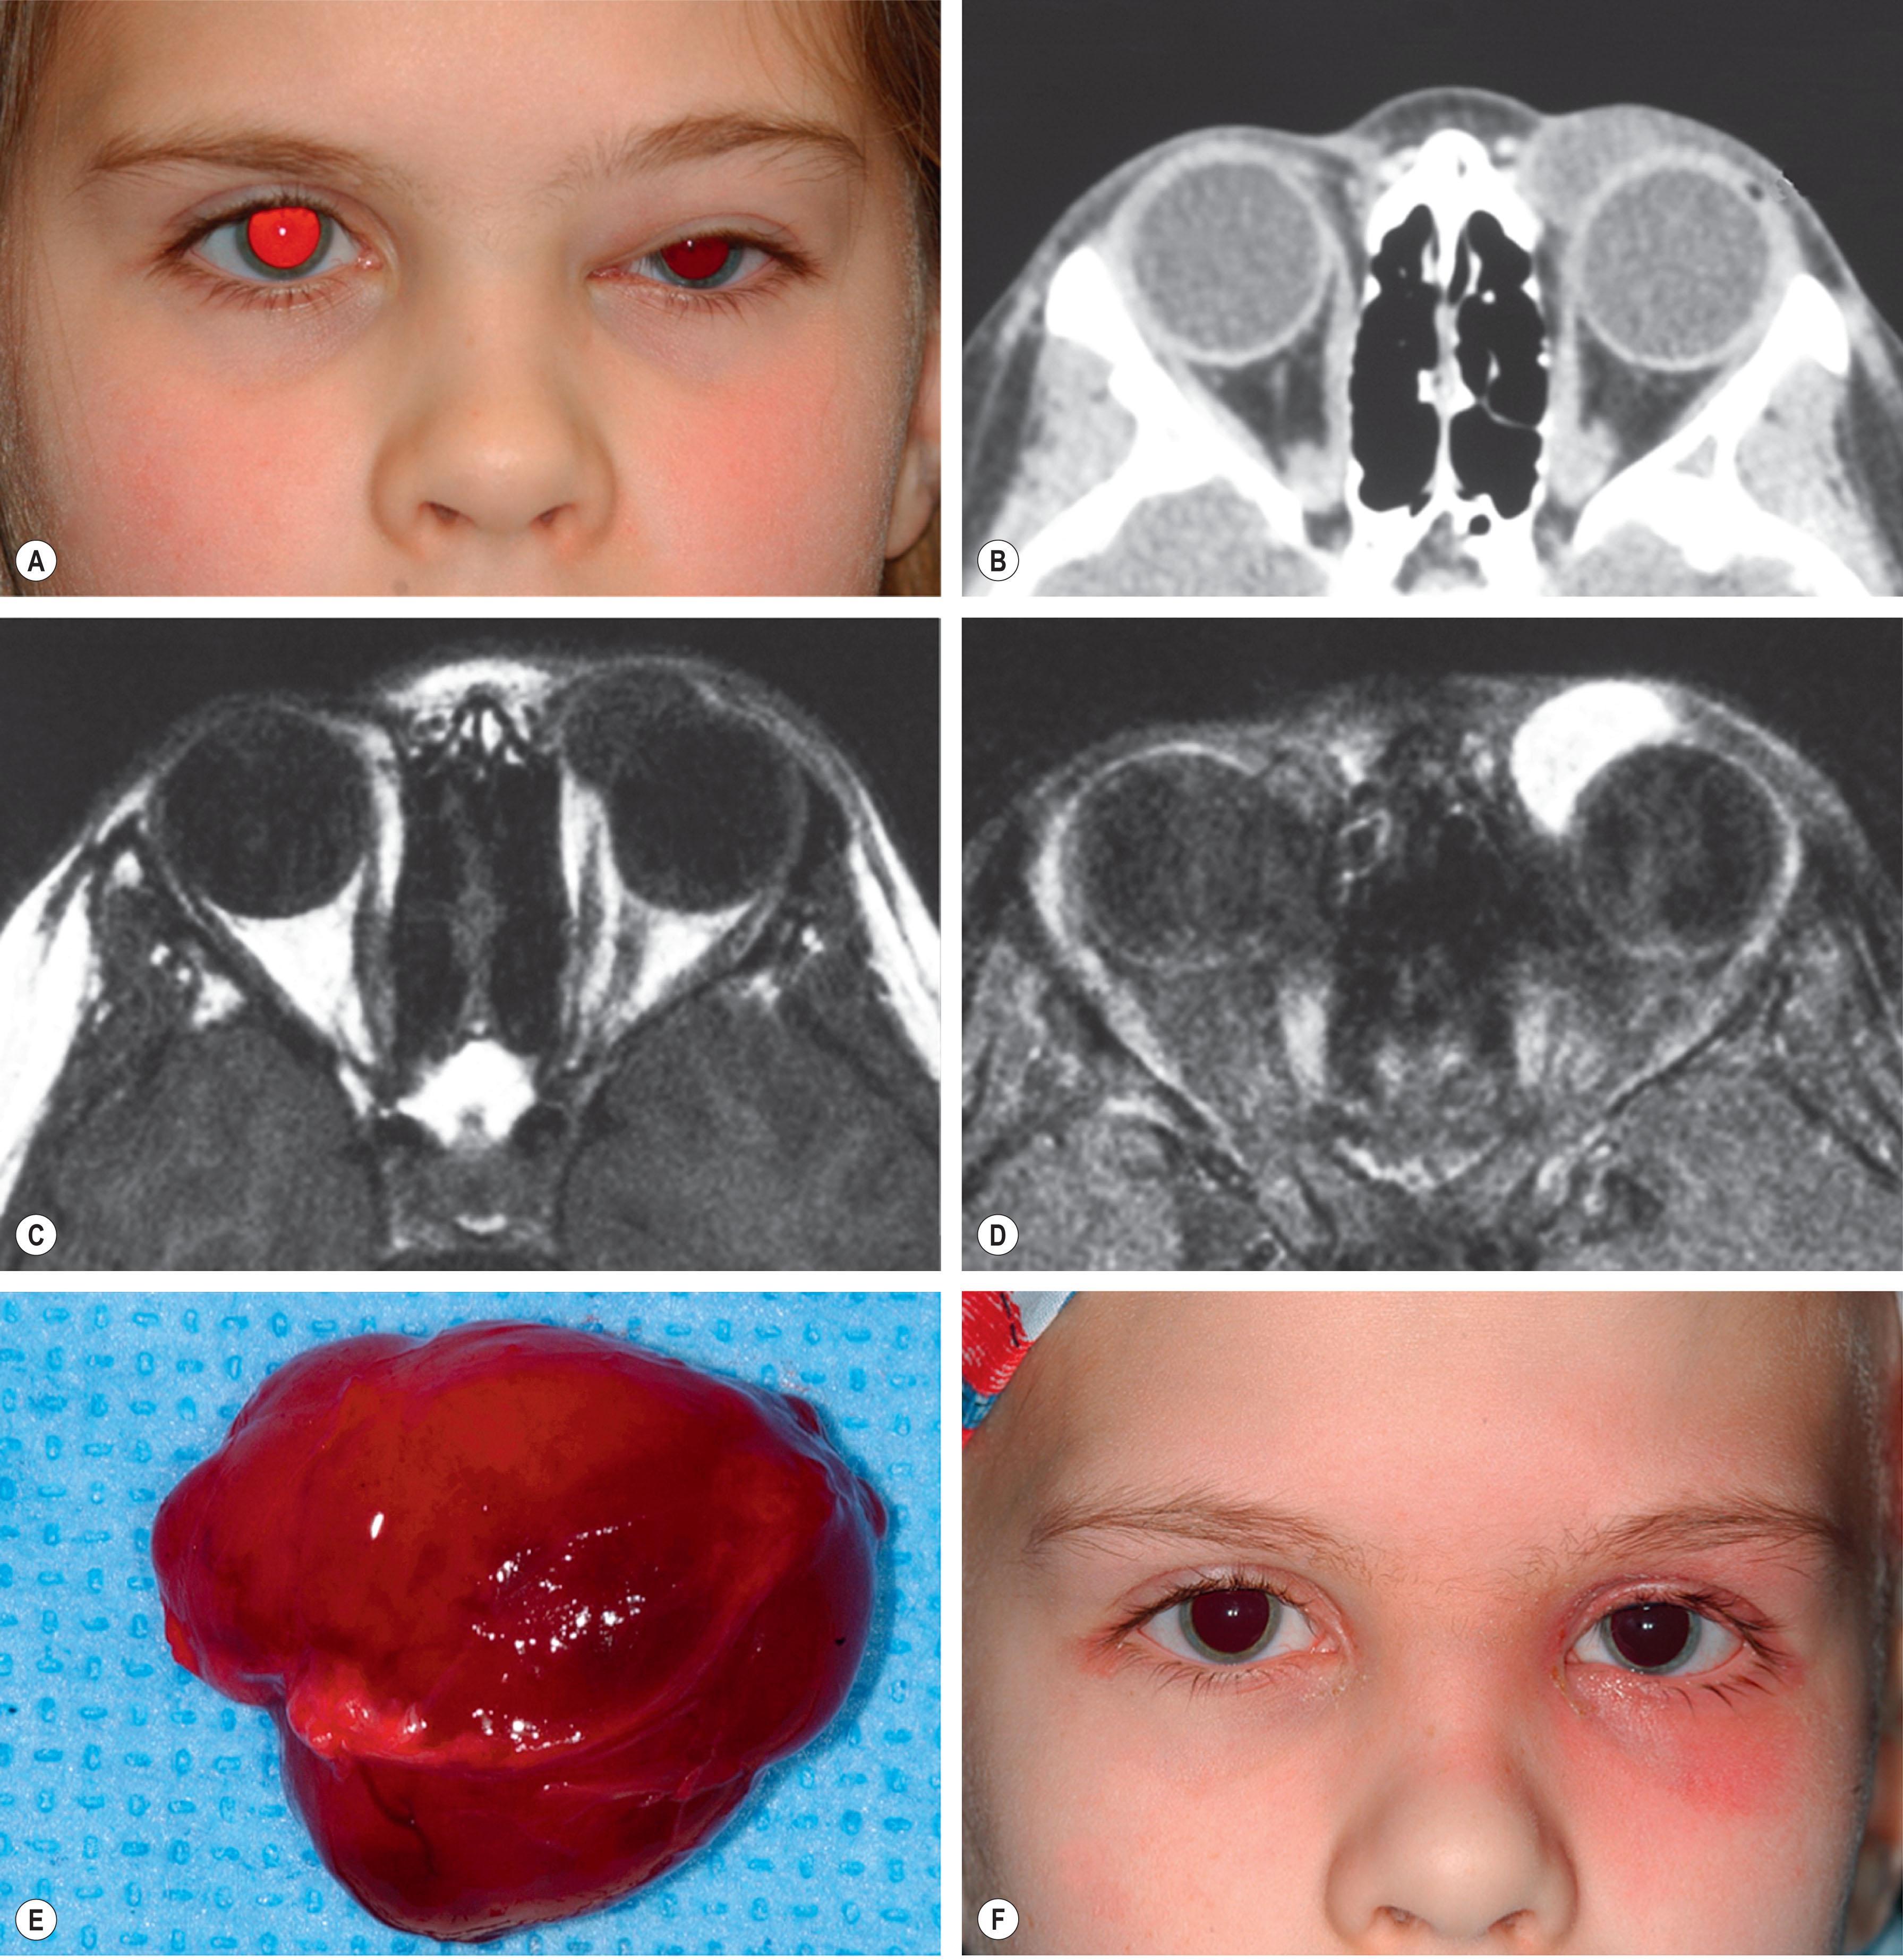 Fig. 22.1, Orbital rhabdomyosarcoma in a young girl. (A) Facial appearance showing downward displacement of left eye. (B) Computed tomography showing solid mass in orbit superonasally. (C) MRI in T1-weighted image without enhancement depicting circumscribed orbital mass. (D) MRI in T1-weighted image with gadolinium showing uniform enhancement of the malignancy. (E) Circumscribed tumor after surgical excision. (F) Slight erythema of periocular skin following radiotherapy.